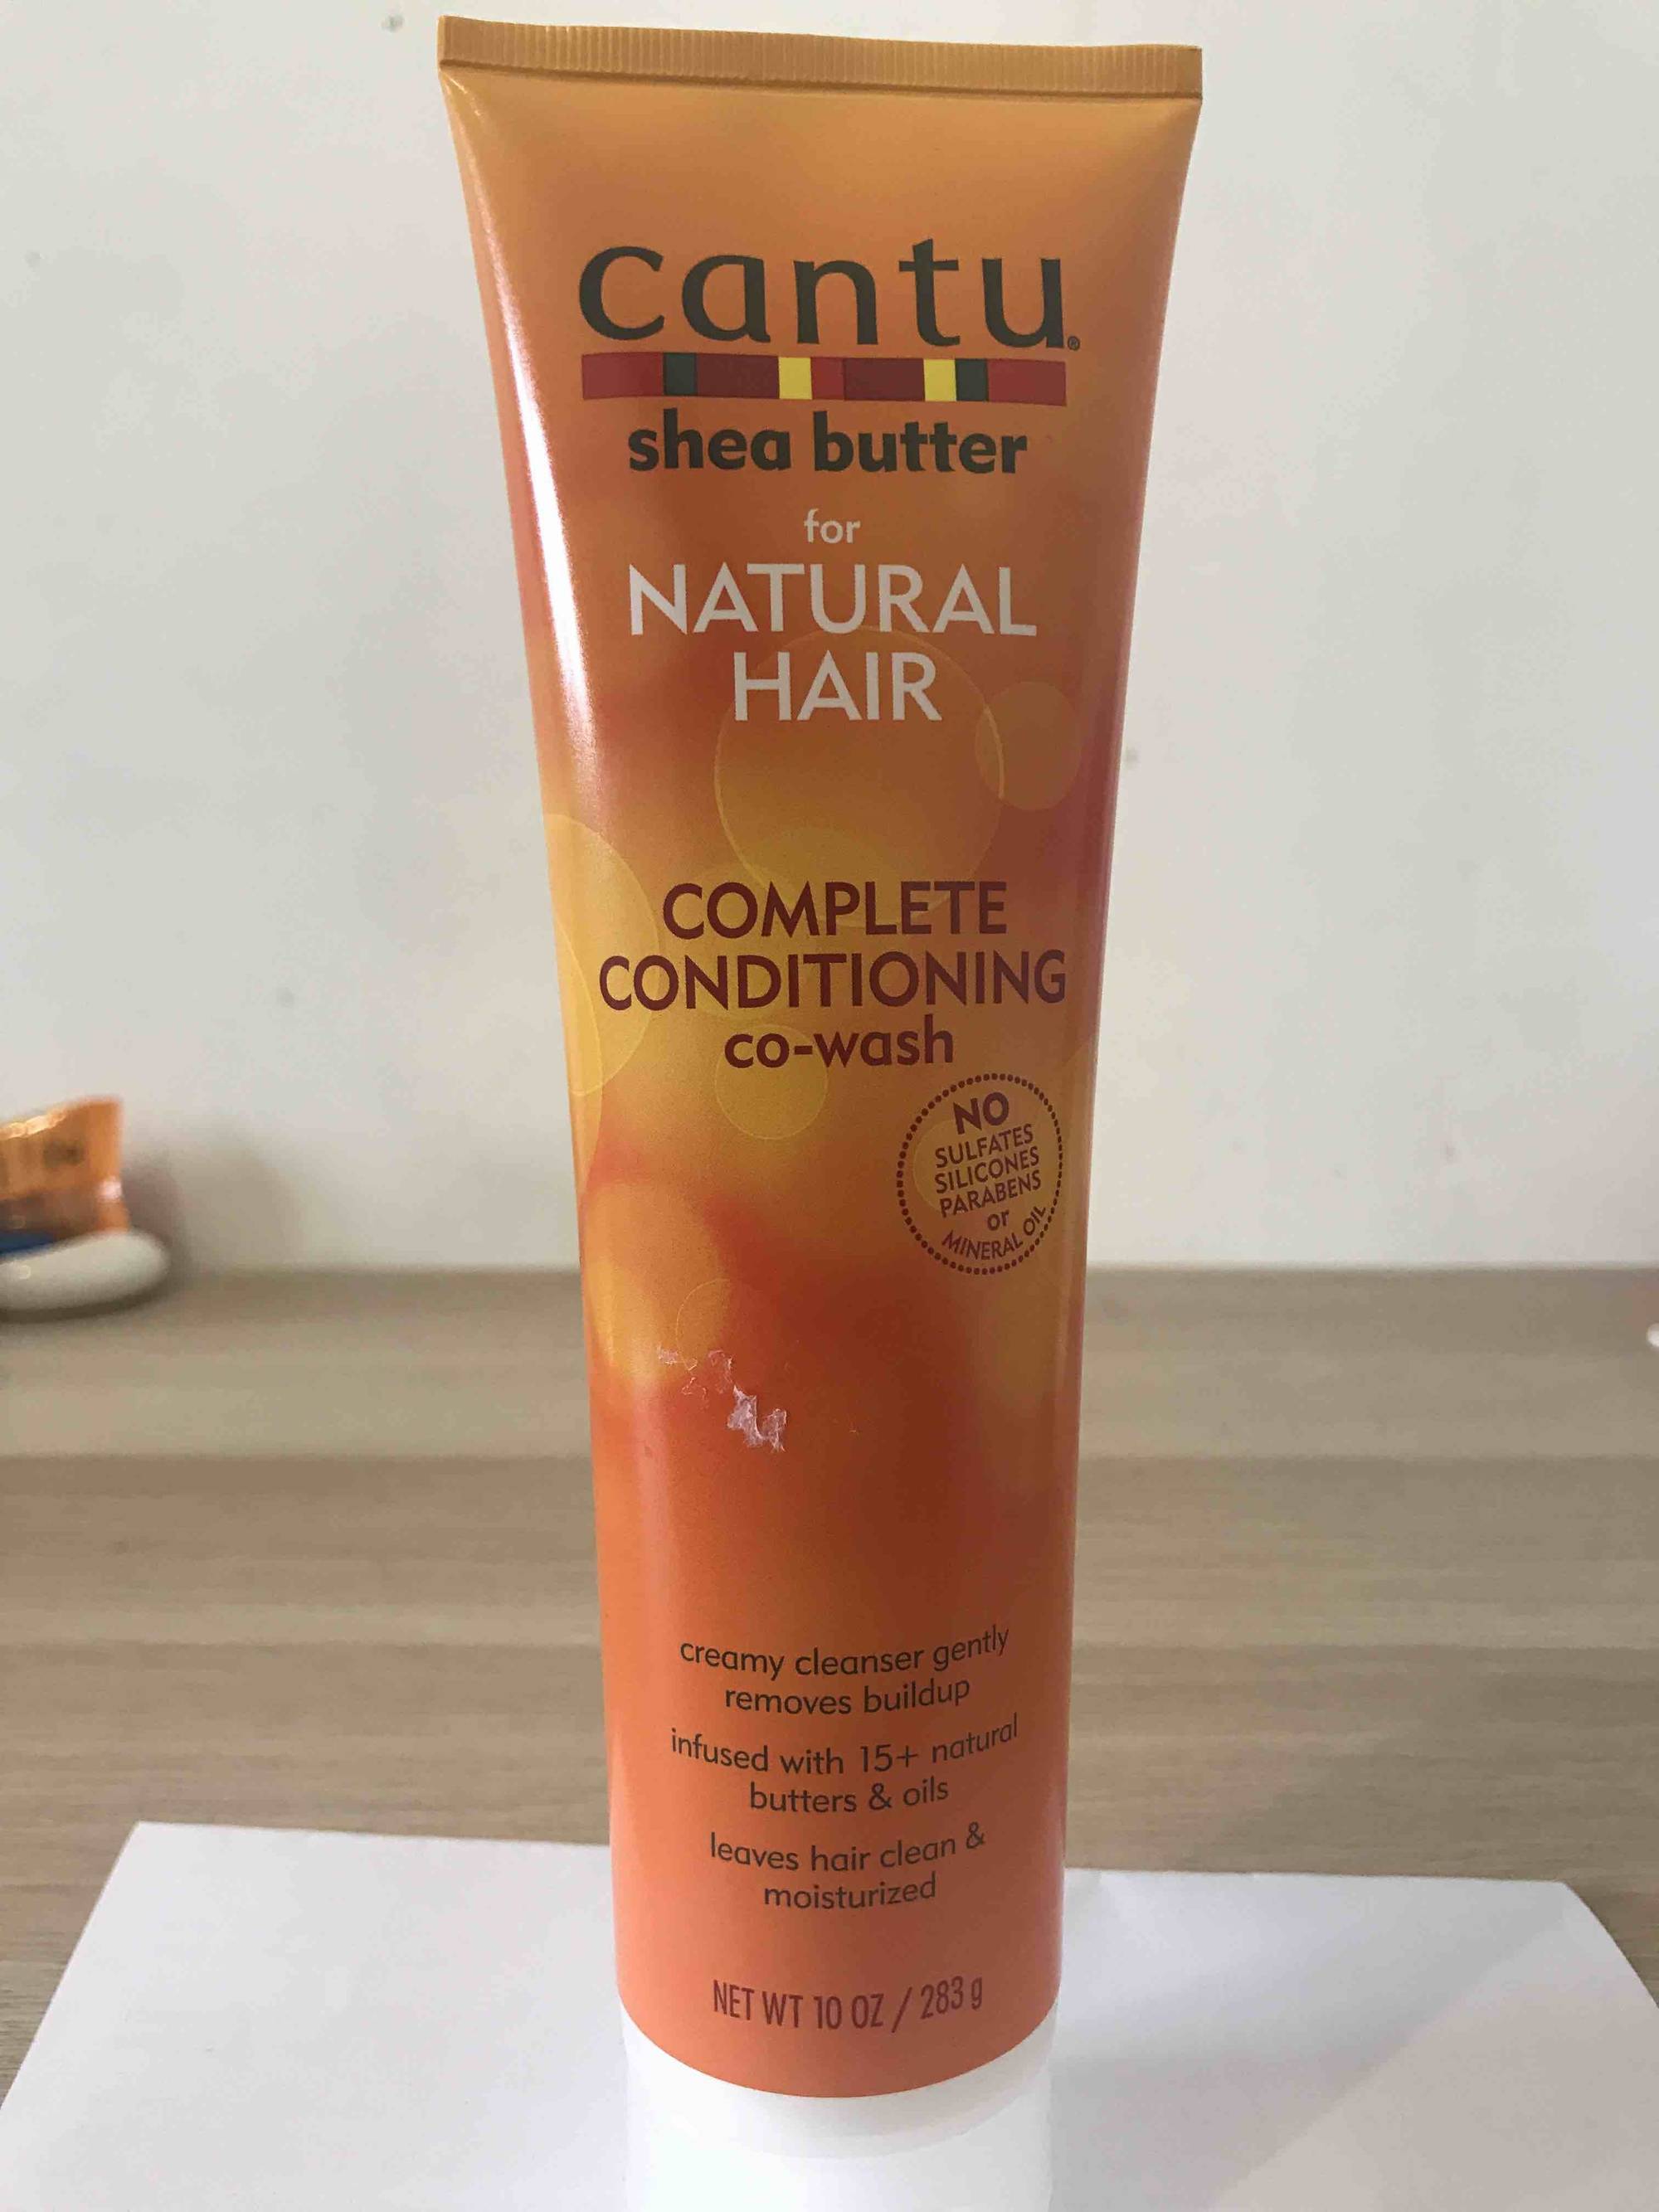 CANTU - Shea butter for natural hair - Complete conditioning co-wash